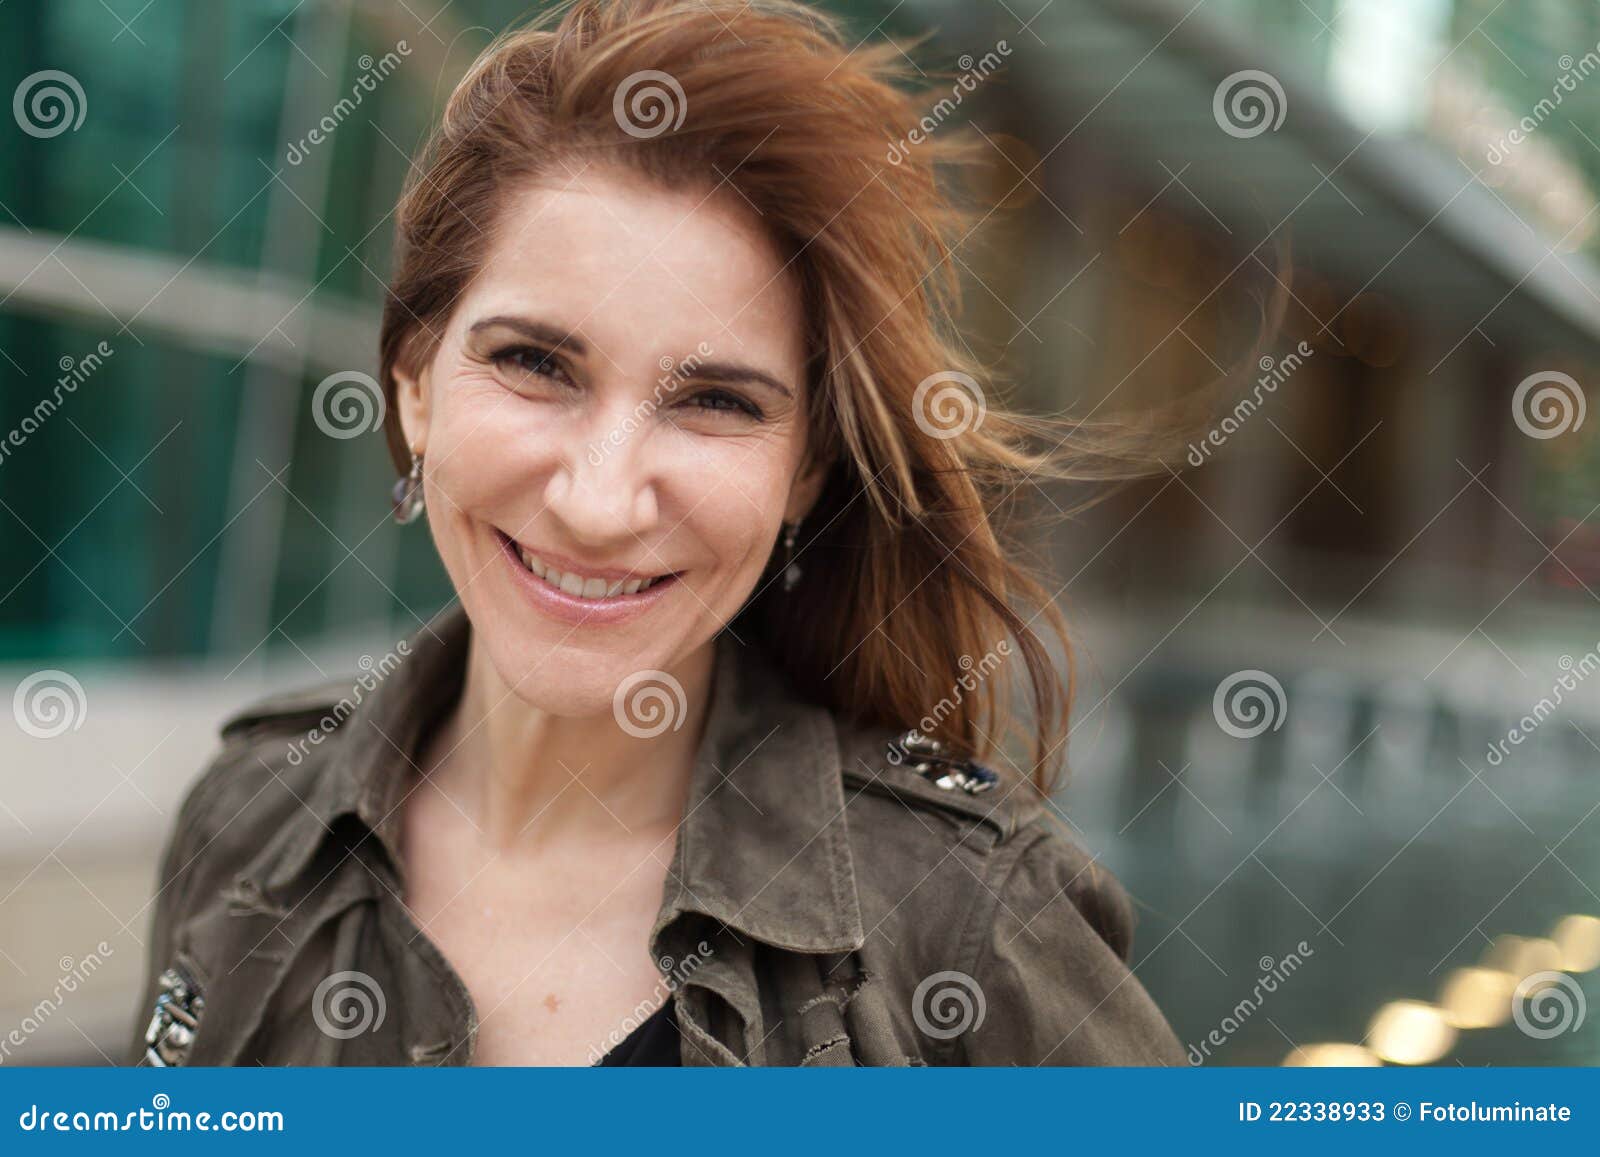 attractive middle age woman